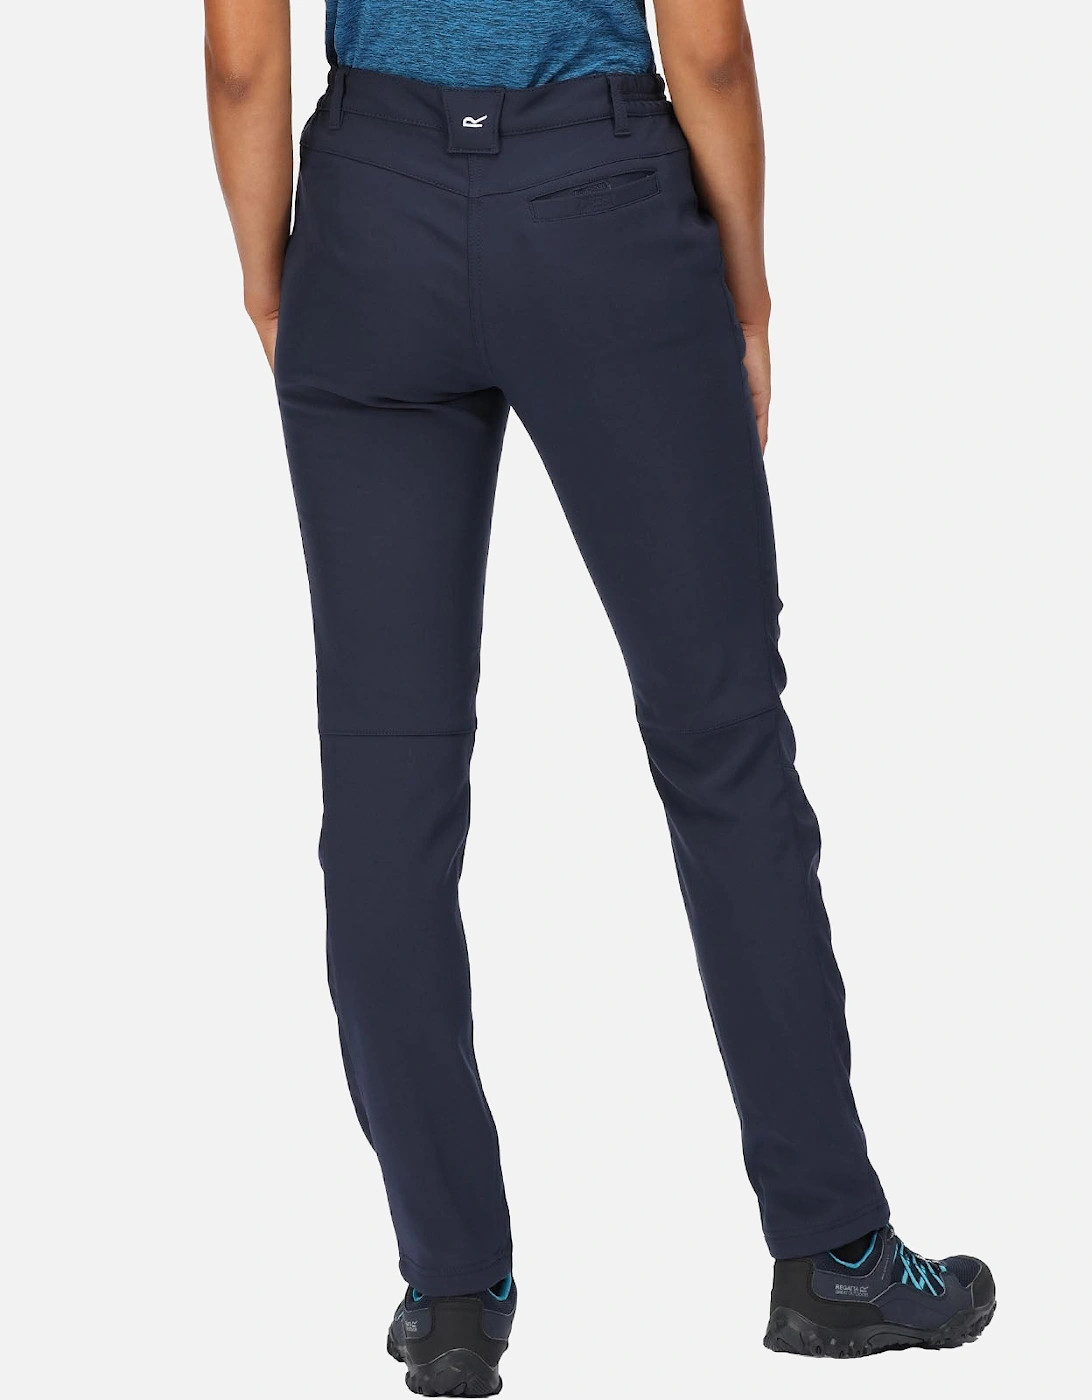 Womens Fenton Softshell Water Resistant Trousers - Navy